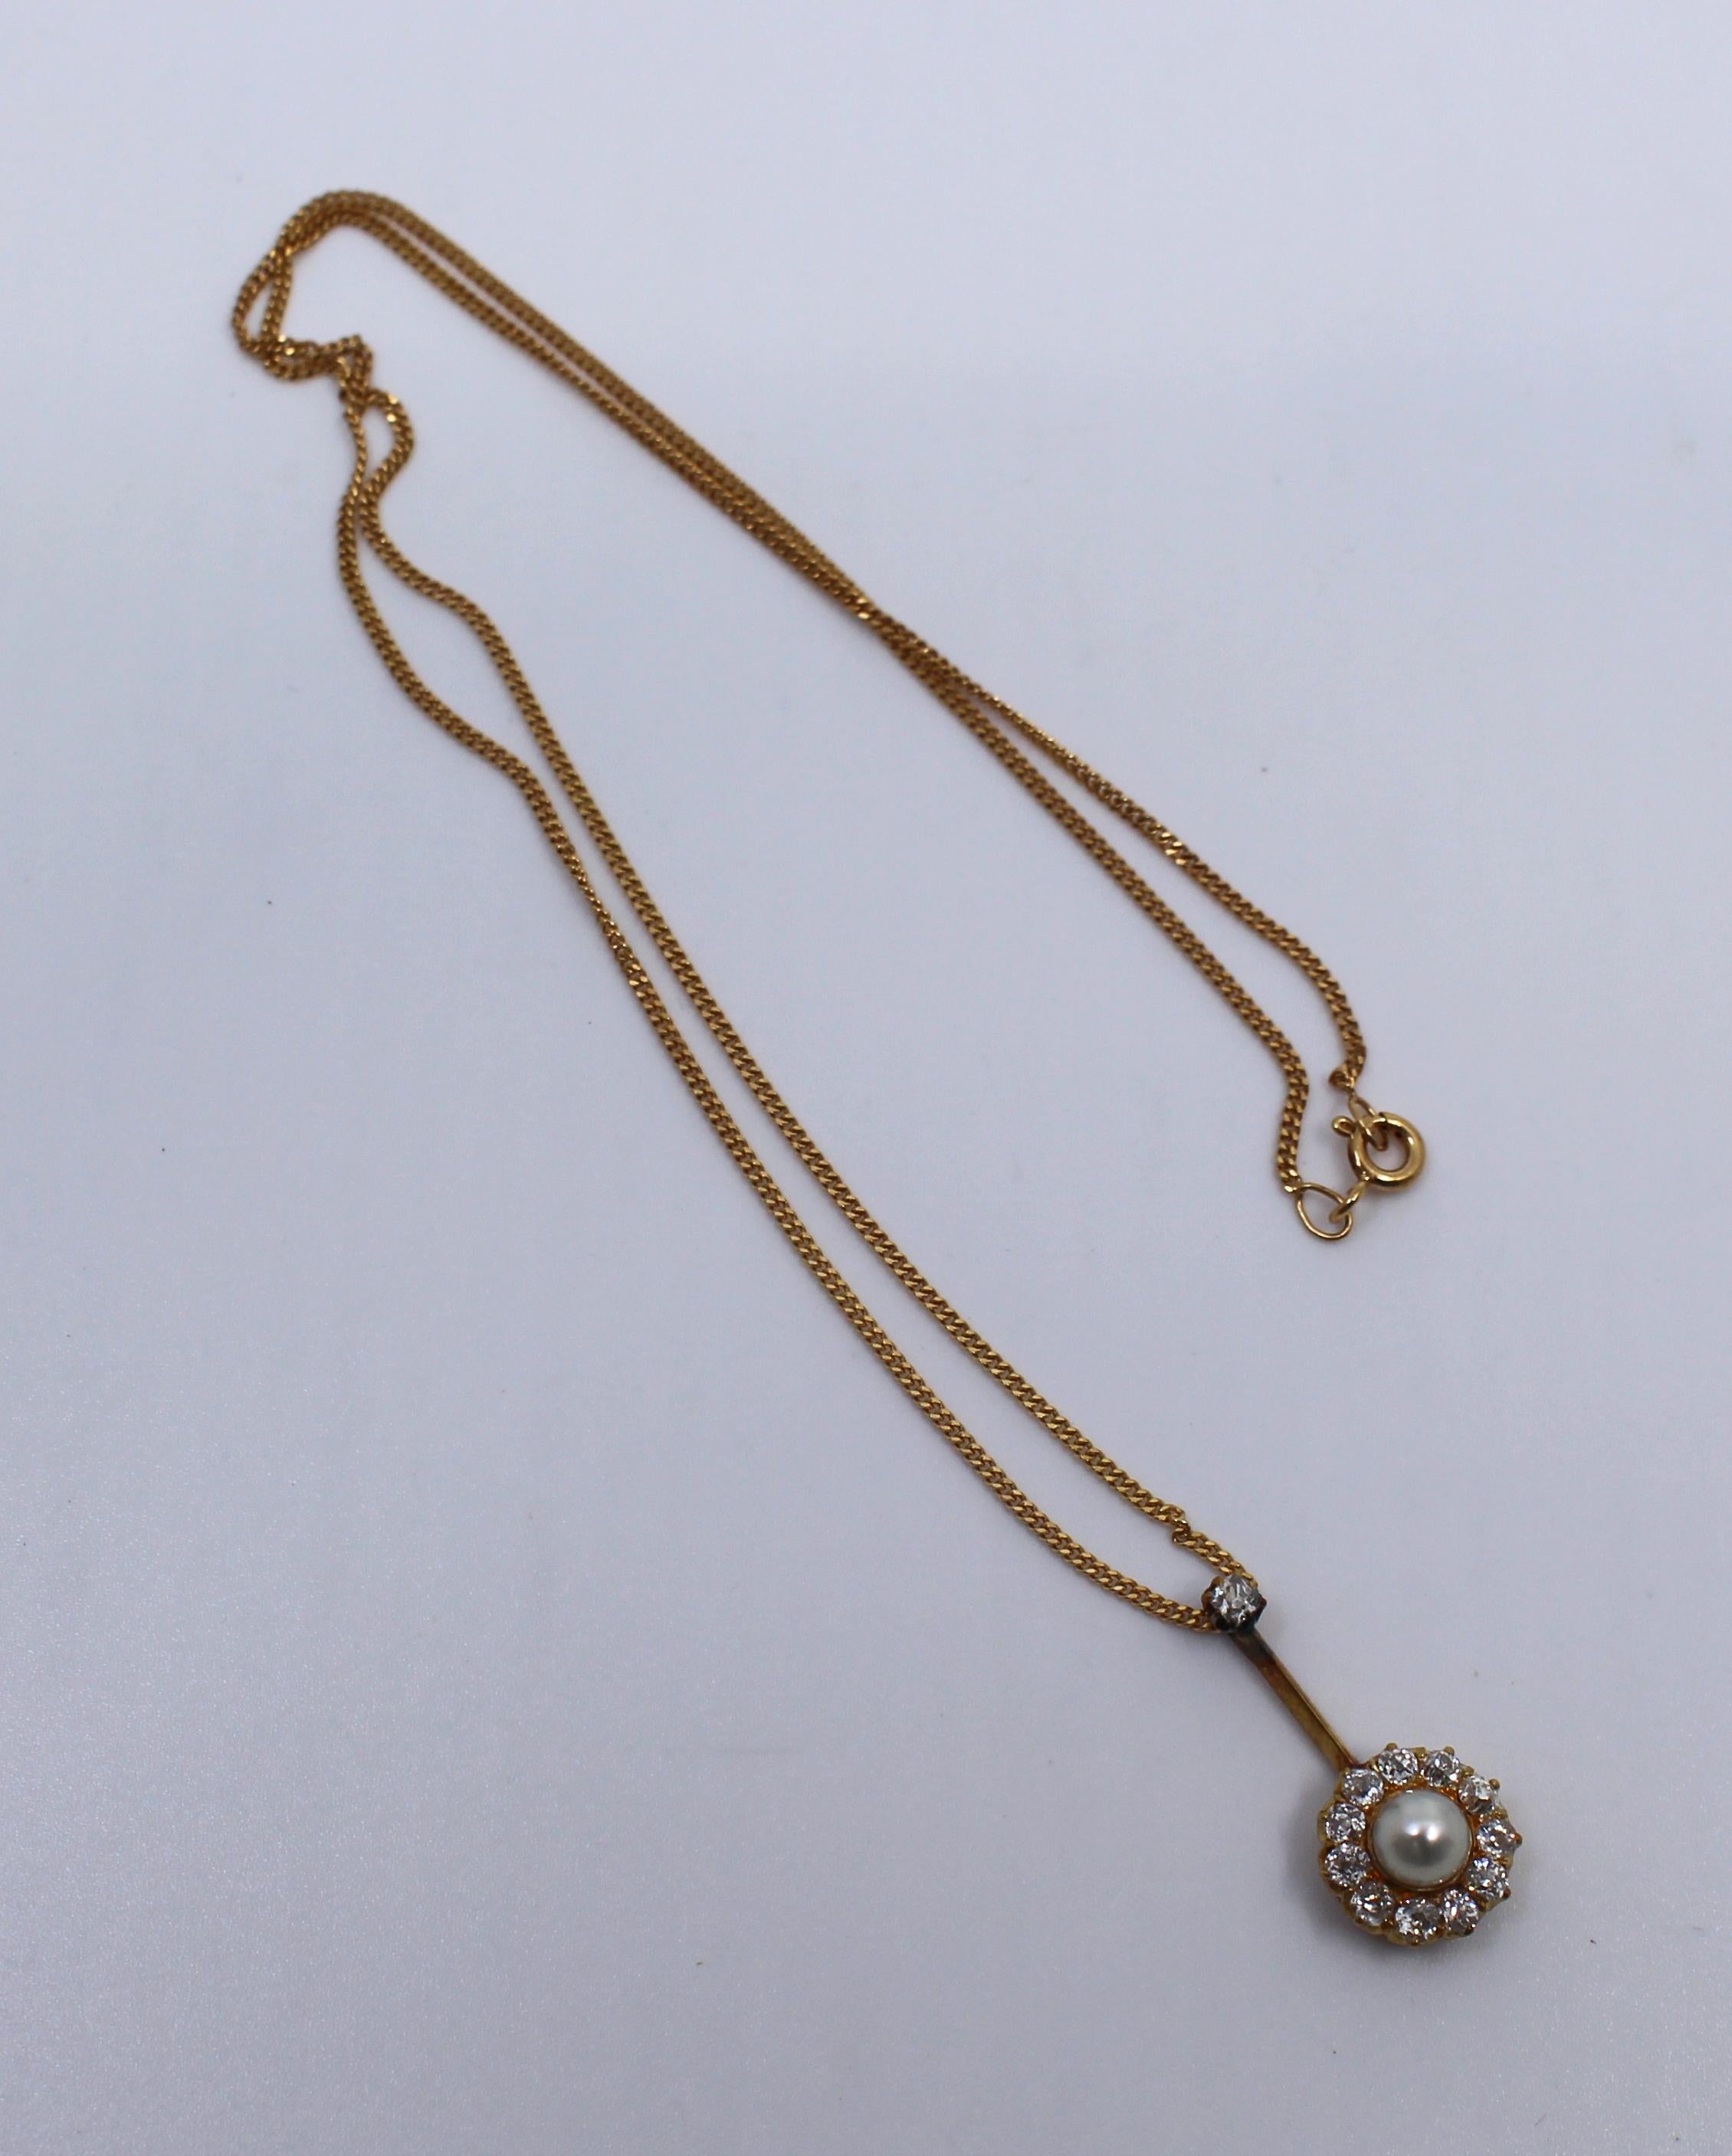 Period:
circa 1910

Composition:
Pearl, diamond and gold

Dimensions (pendant):
1 x 2.5 x 1 cm

Total weight 
4.2 g

Condition:
Very good condition commensurate with age
 

 
Good looking antique pendant set with a single pearl and